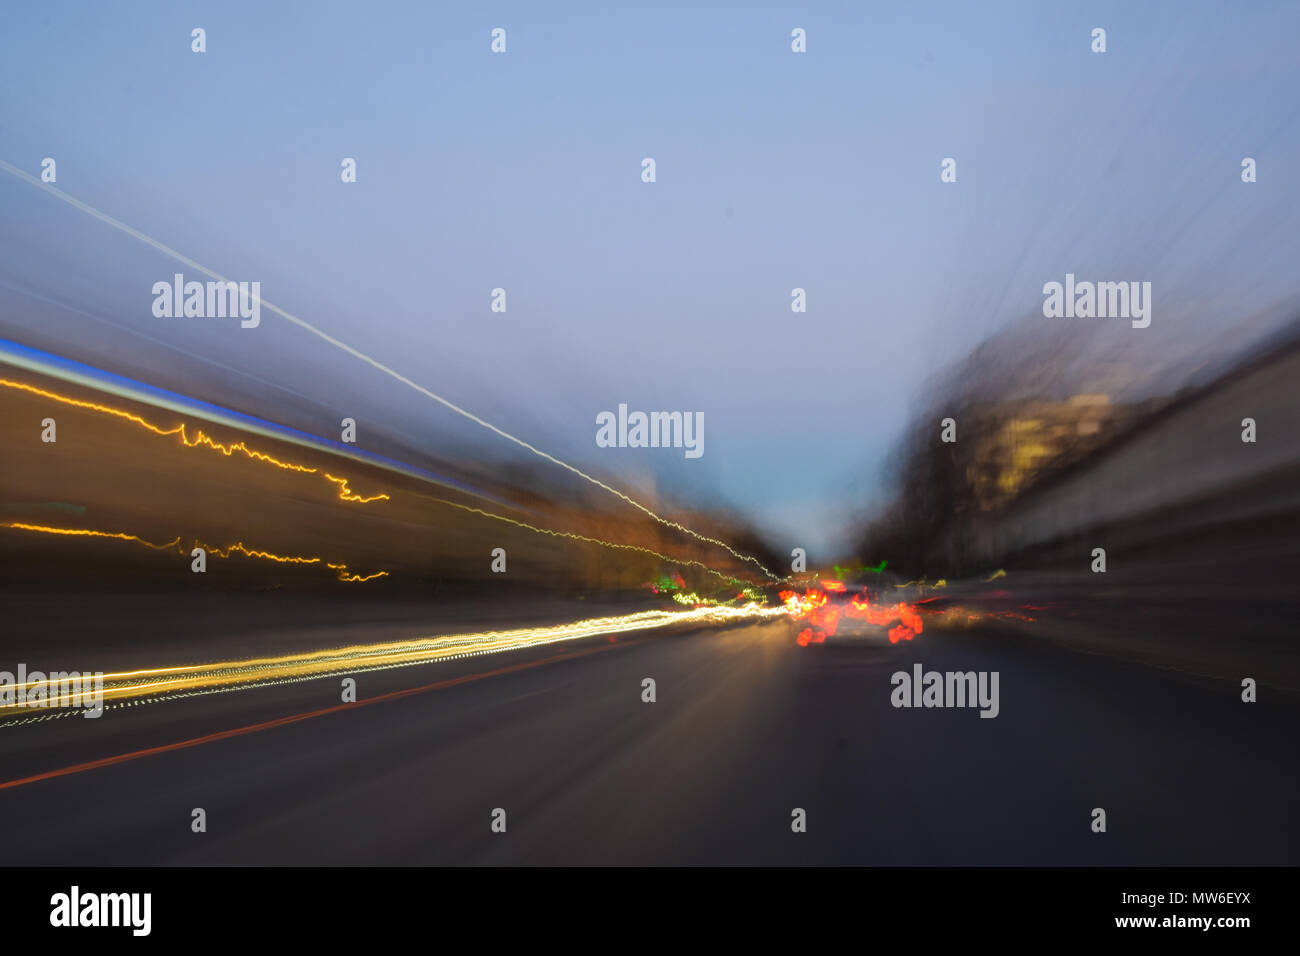 abstract image of street lights at blue hour Stock Photo